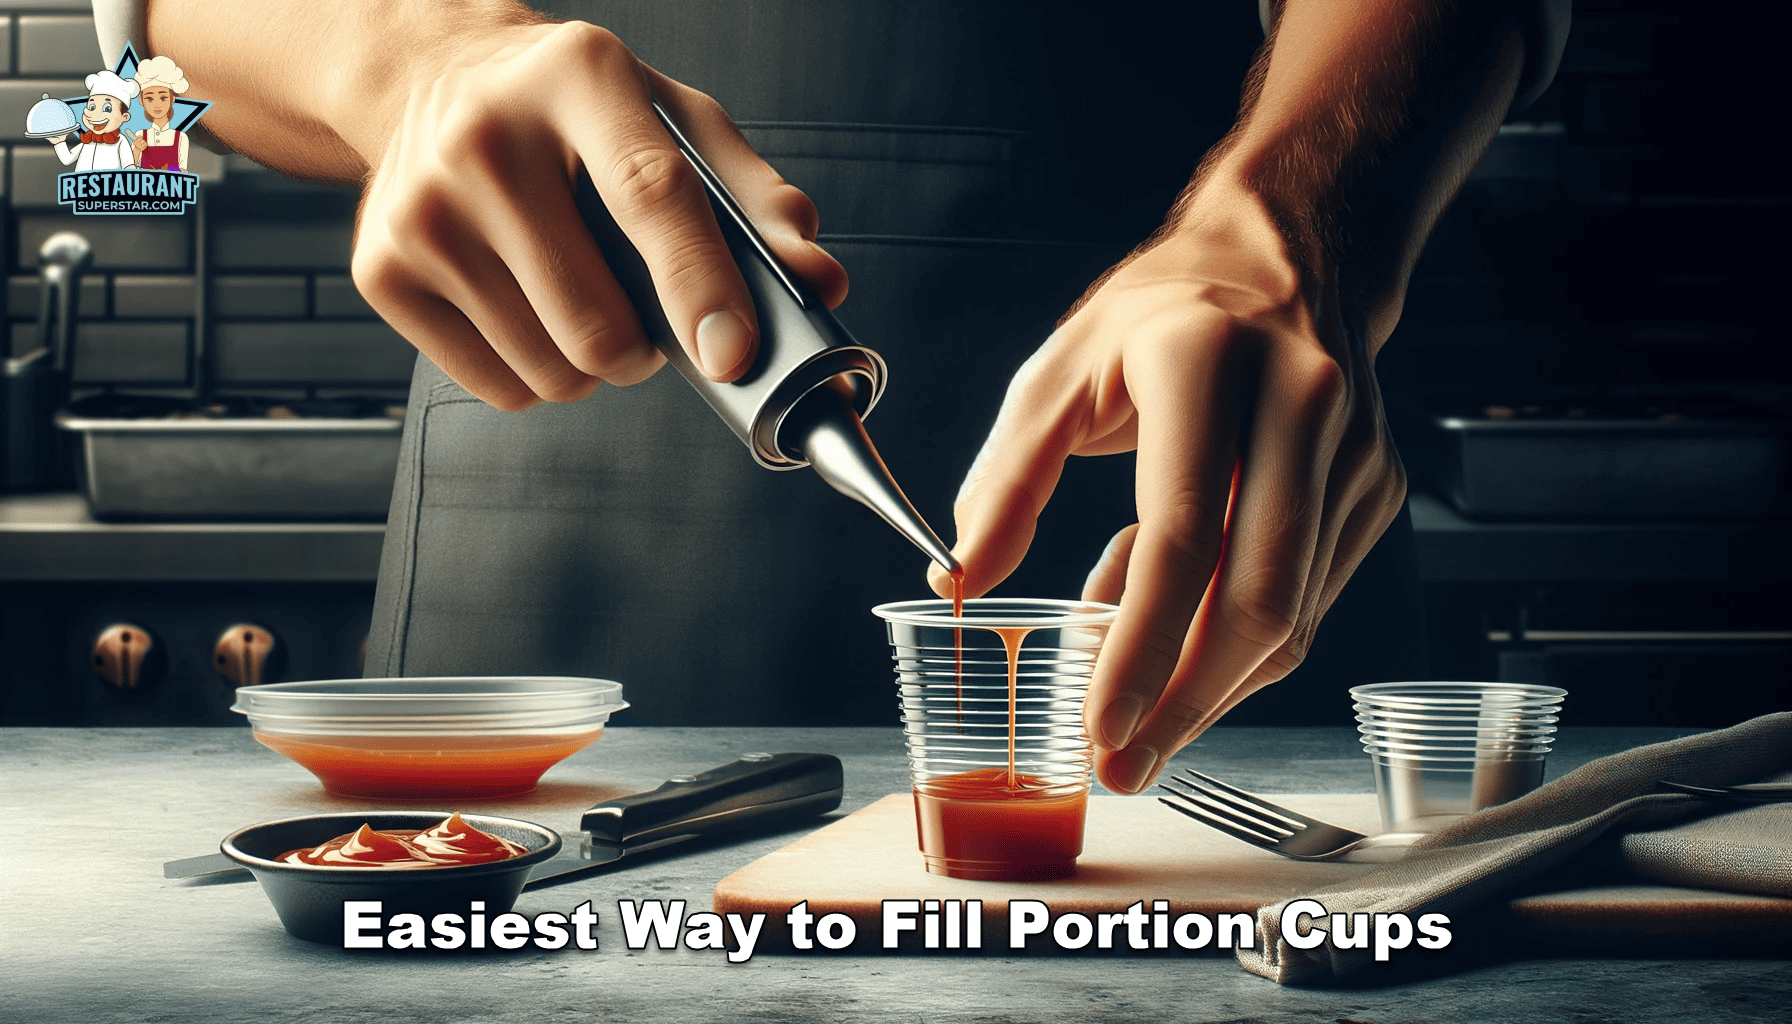 Easiest Way to Fill Portion Cups for a Restaurant